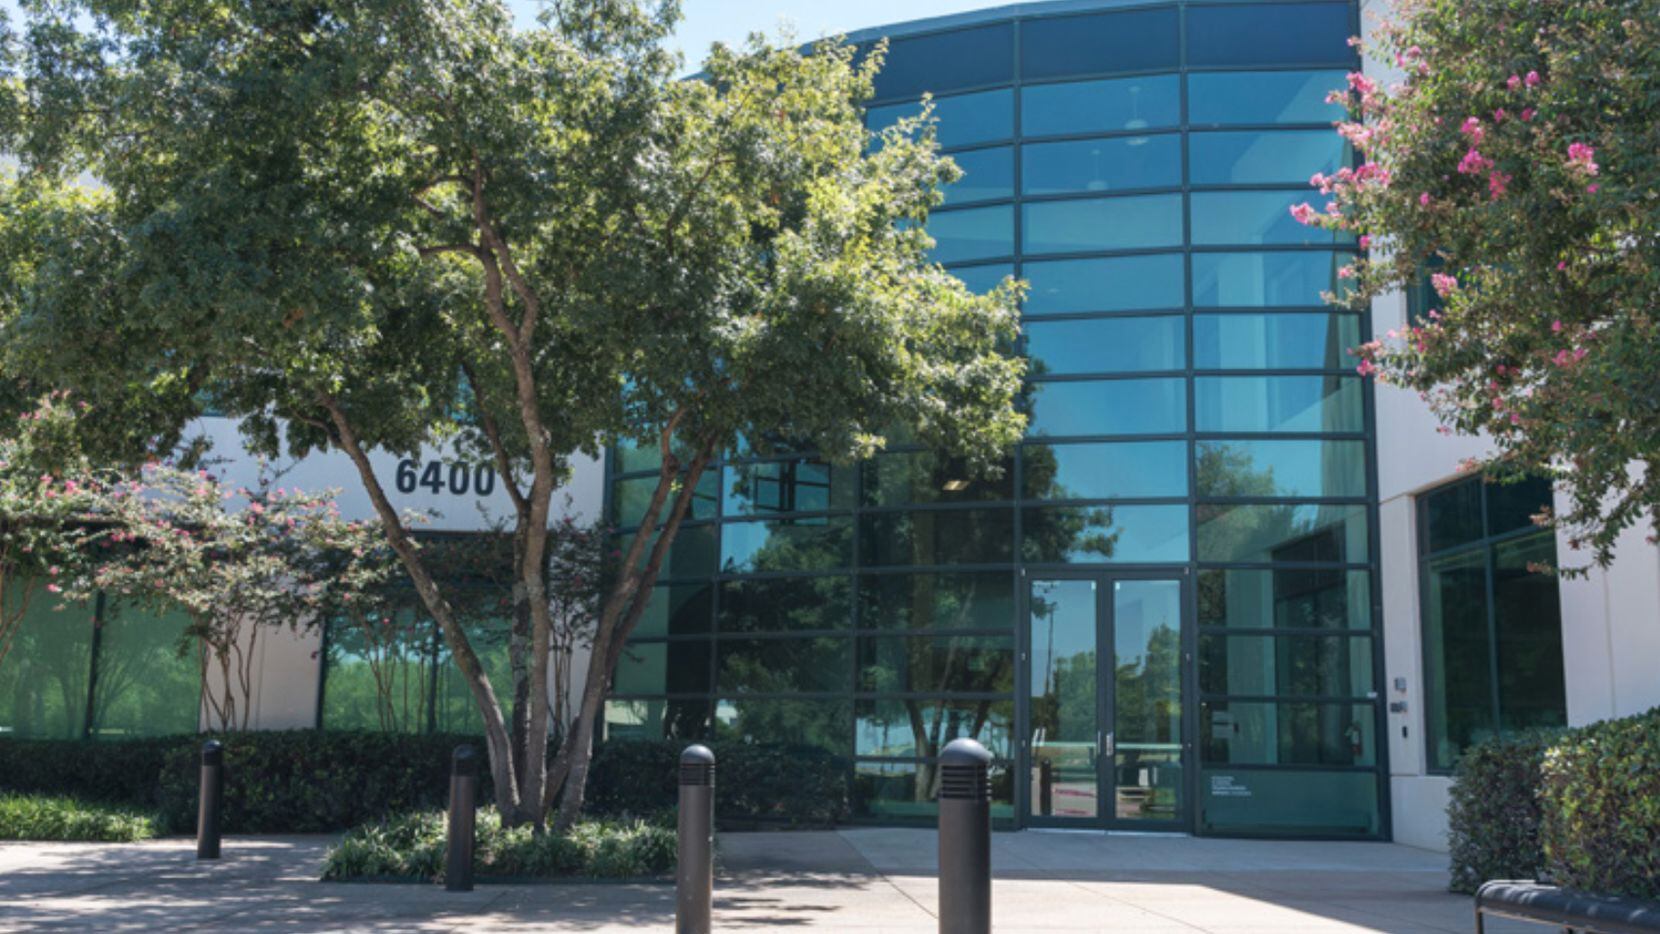 The International Business Park building is at 6400 International Parkway.